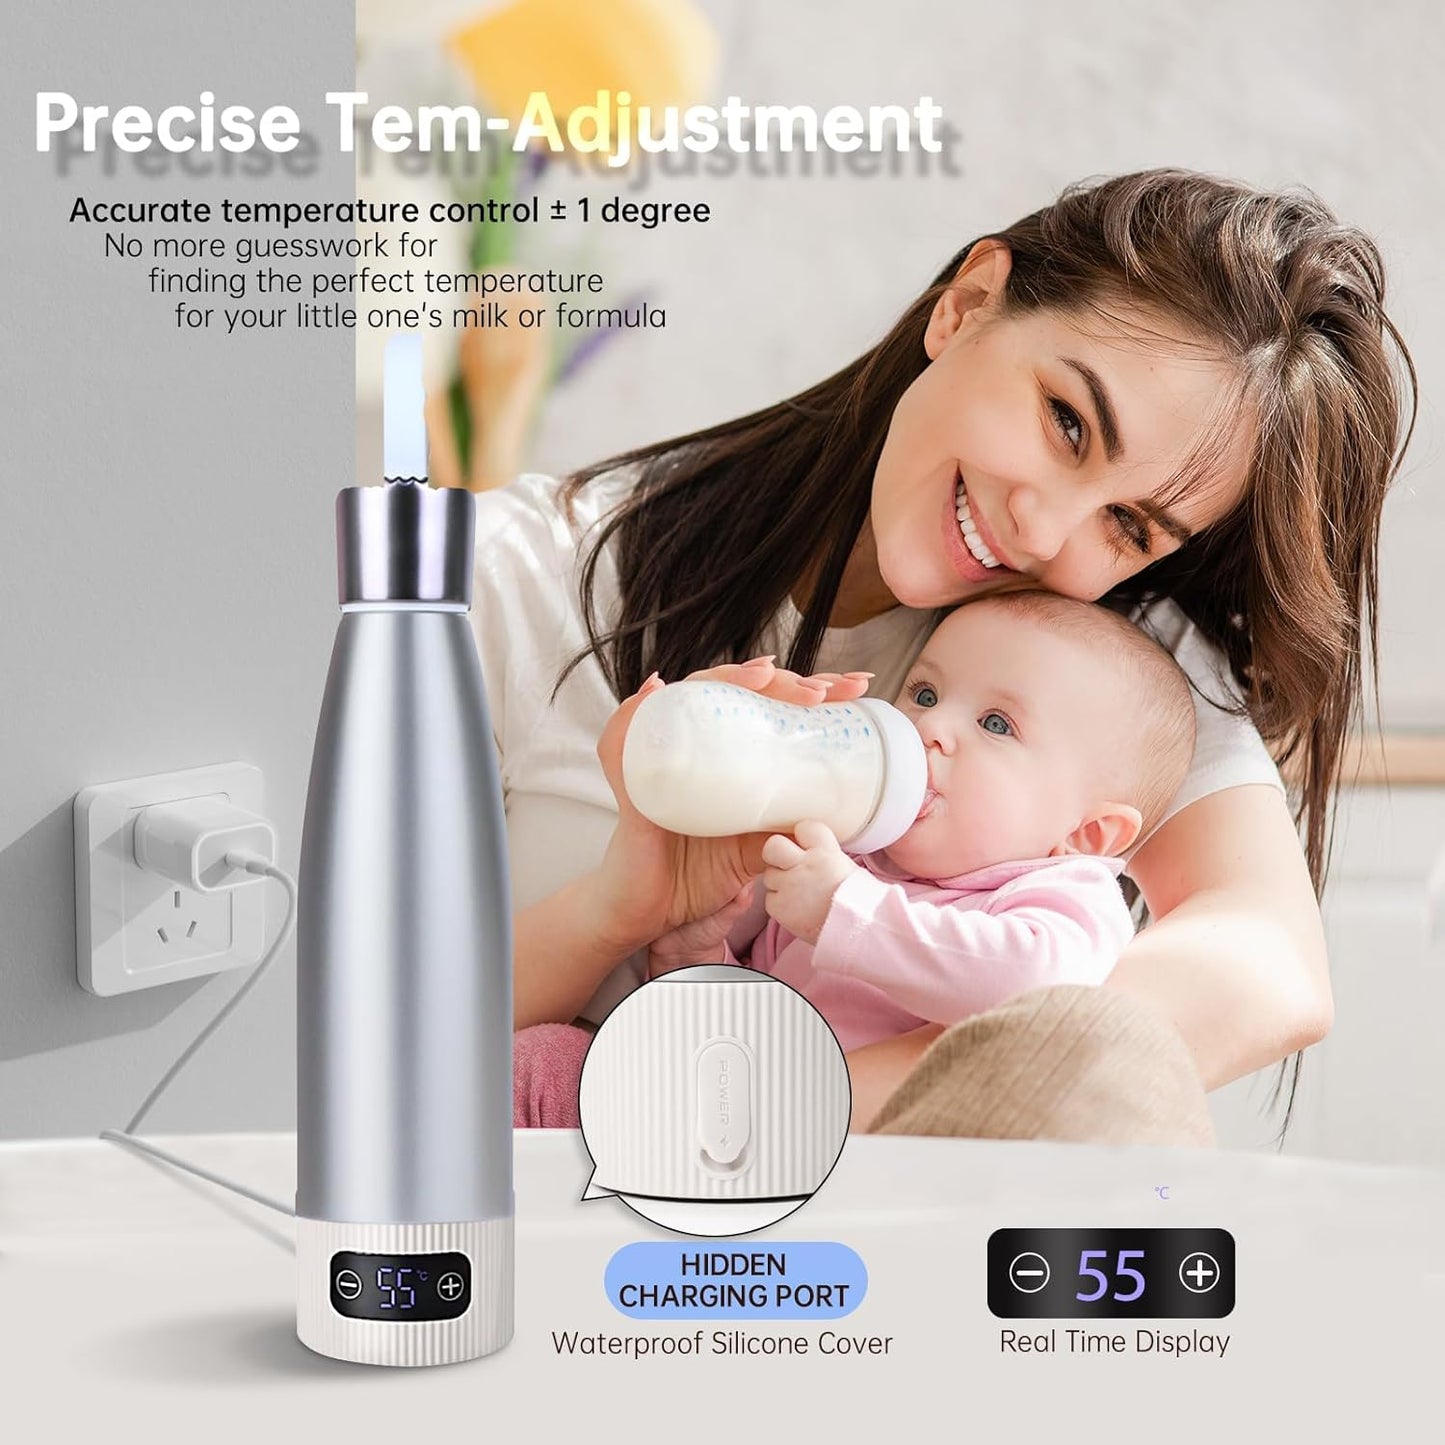 Portable Milk Warmer for Baby Formula, Water or Breastmilk, 18Hrs Constant Warming with Precise Temp Display, 12Oz Capacity Fast Milk Heating, Rechargeable Bottle Warmer Perfect for On The go